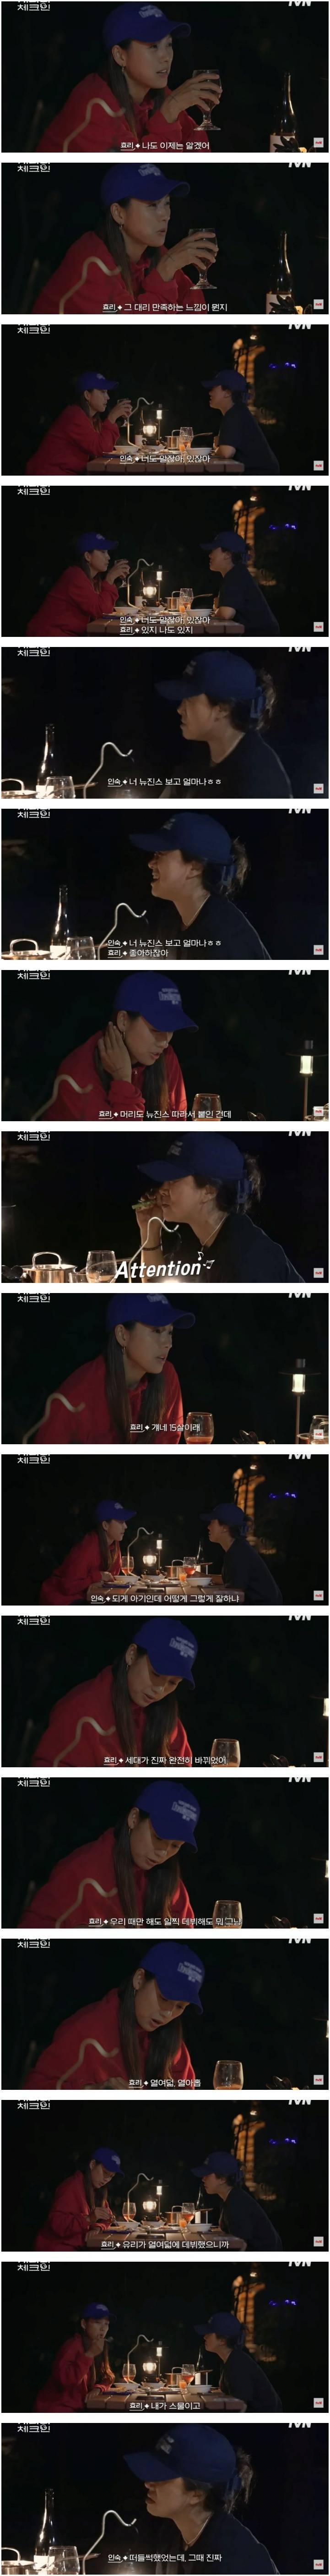 Lee Hyori realized it after watching "New Jin's".